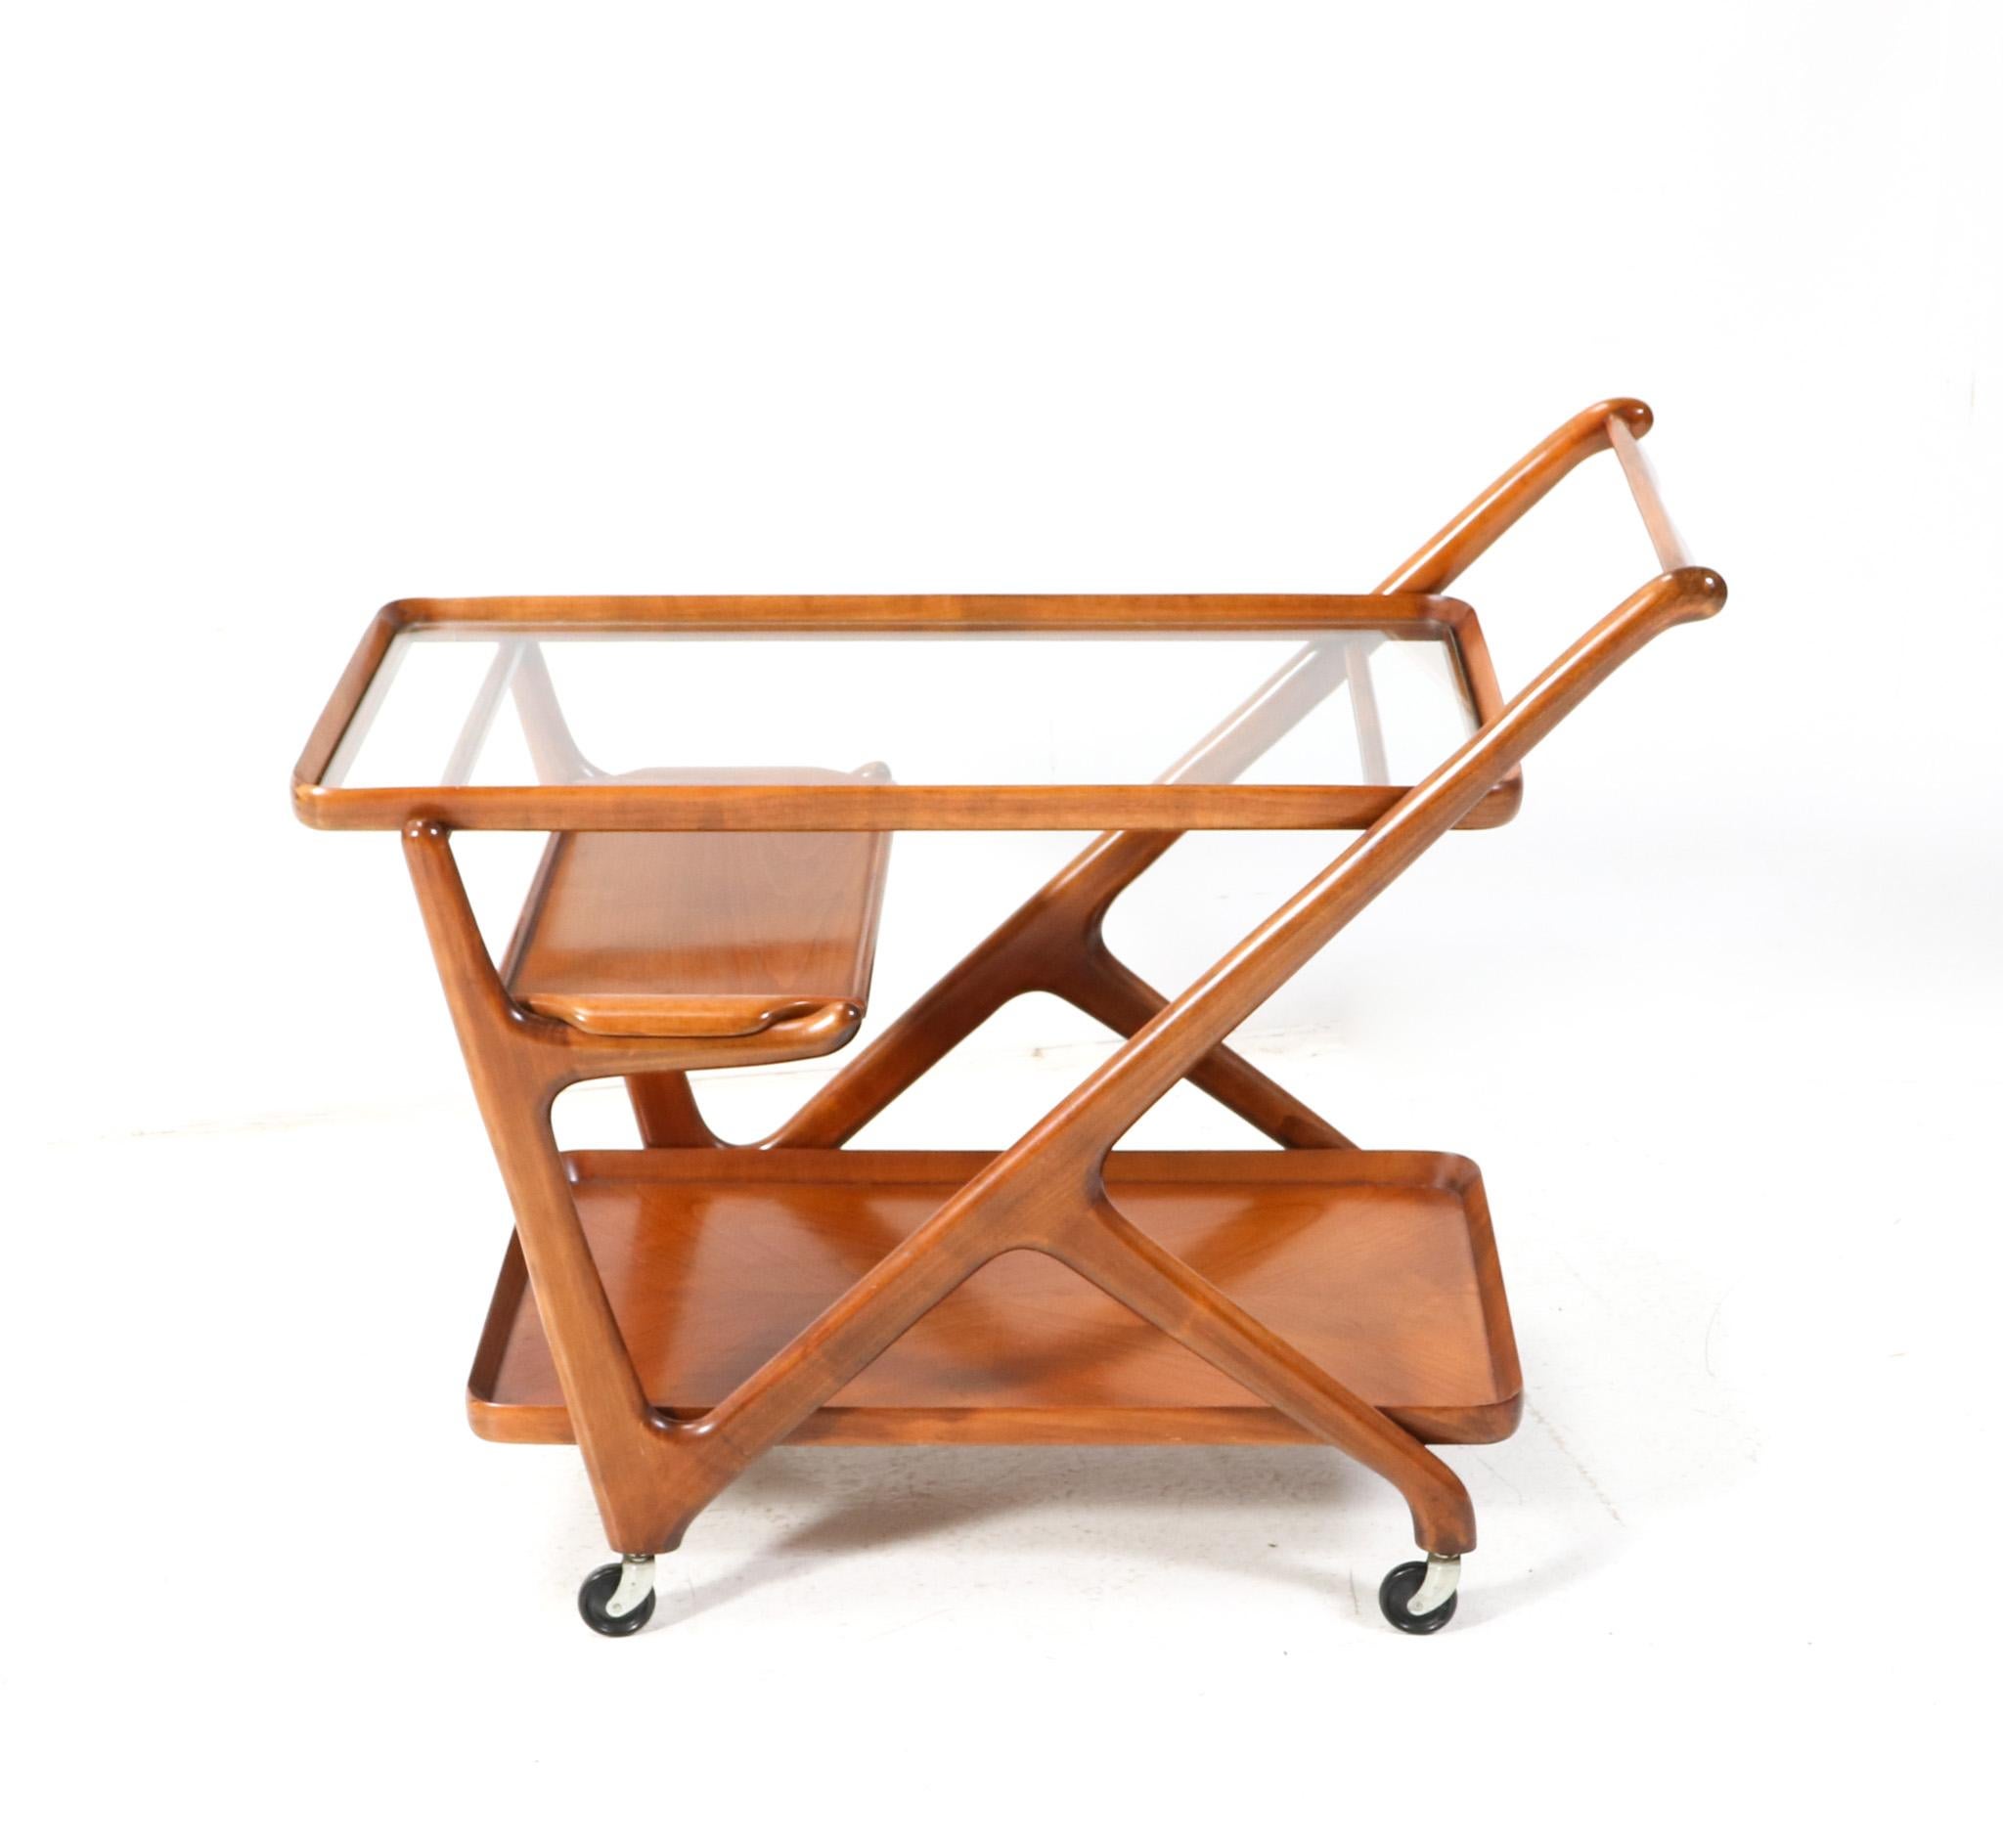 Stunning and elegant Mid-Century Modern trolley or bar cart.
Design by Cesare Lacca for Cassina.
Striking Italian design from the 1950s.
Solid cherry sculptural frame with the original removable small serving tray,
which is hard to find!
Original